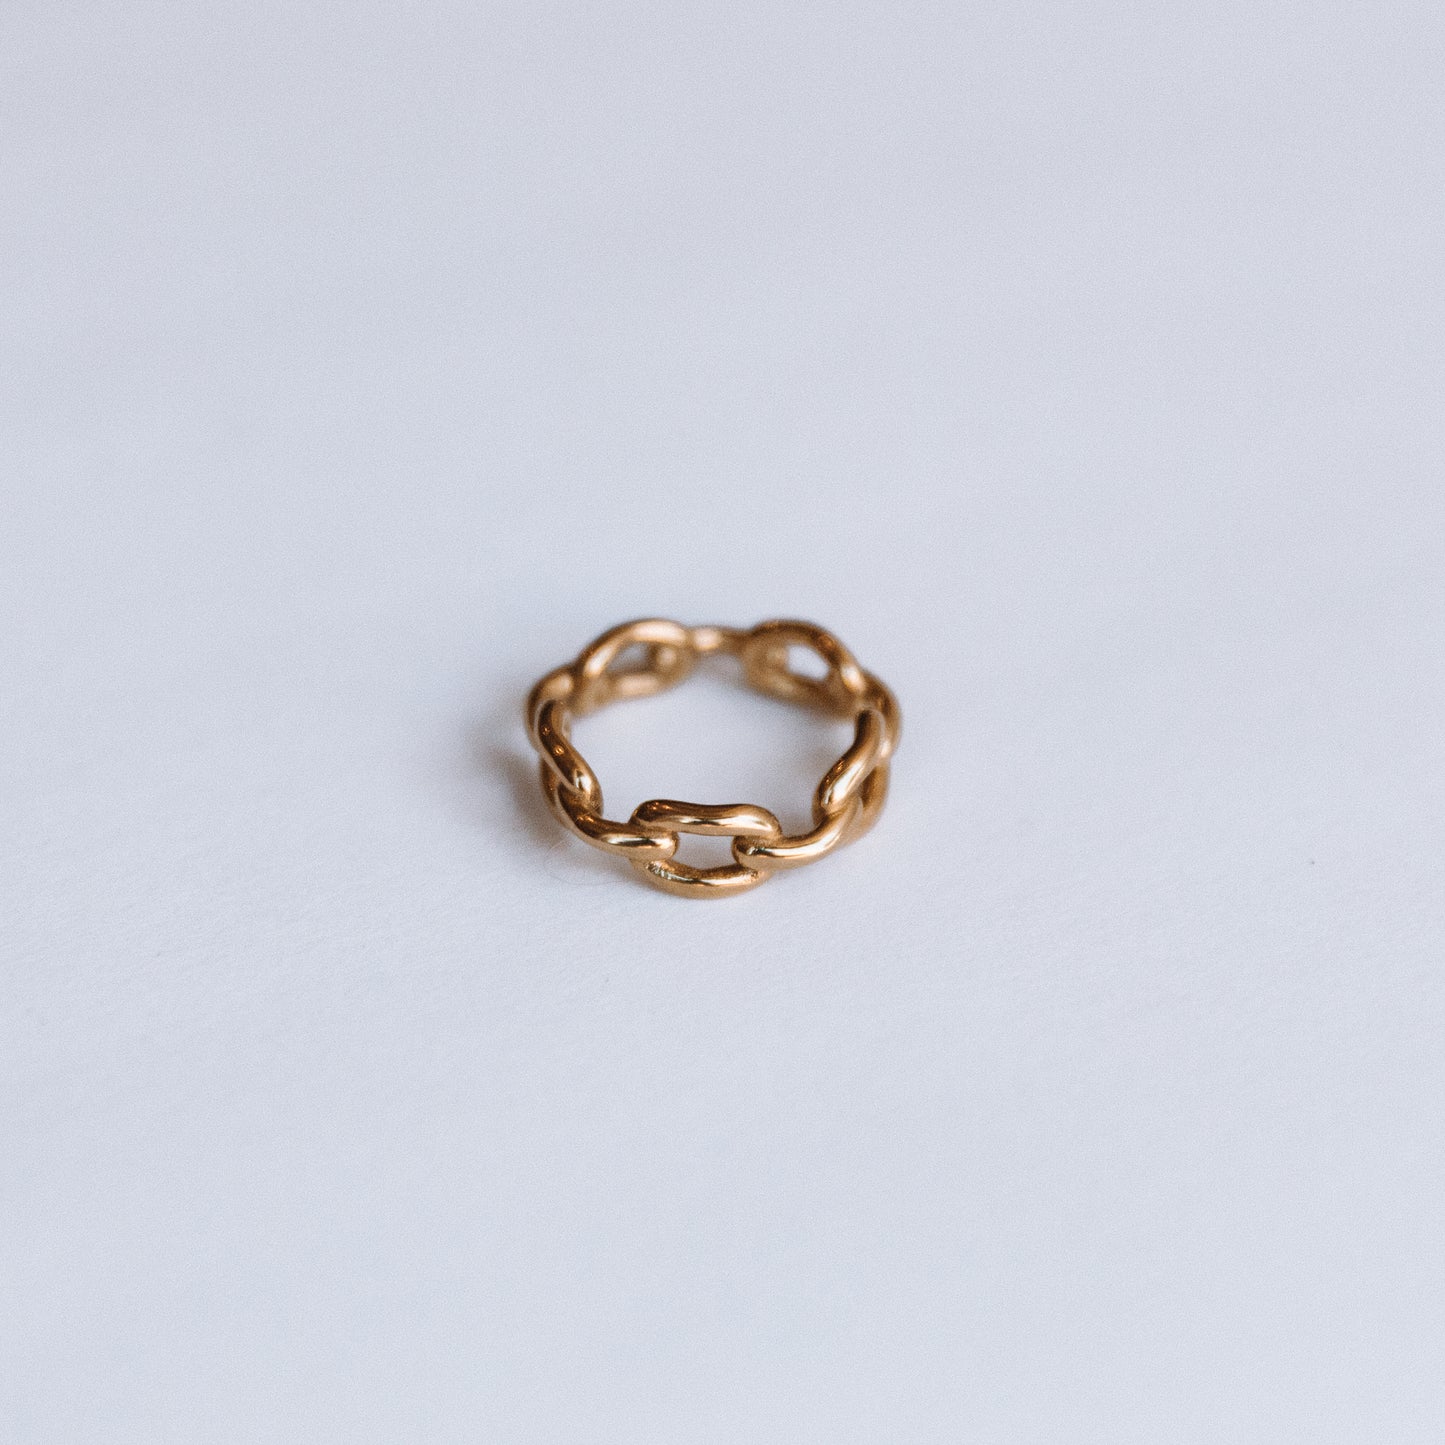 The Chain Link Ring